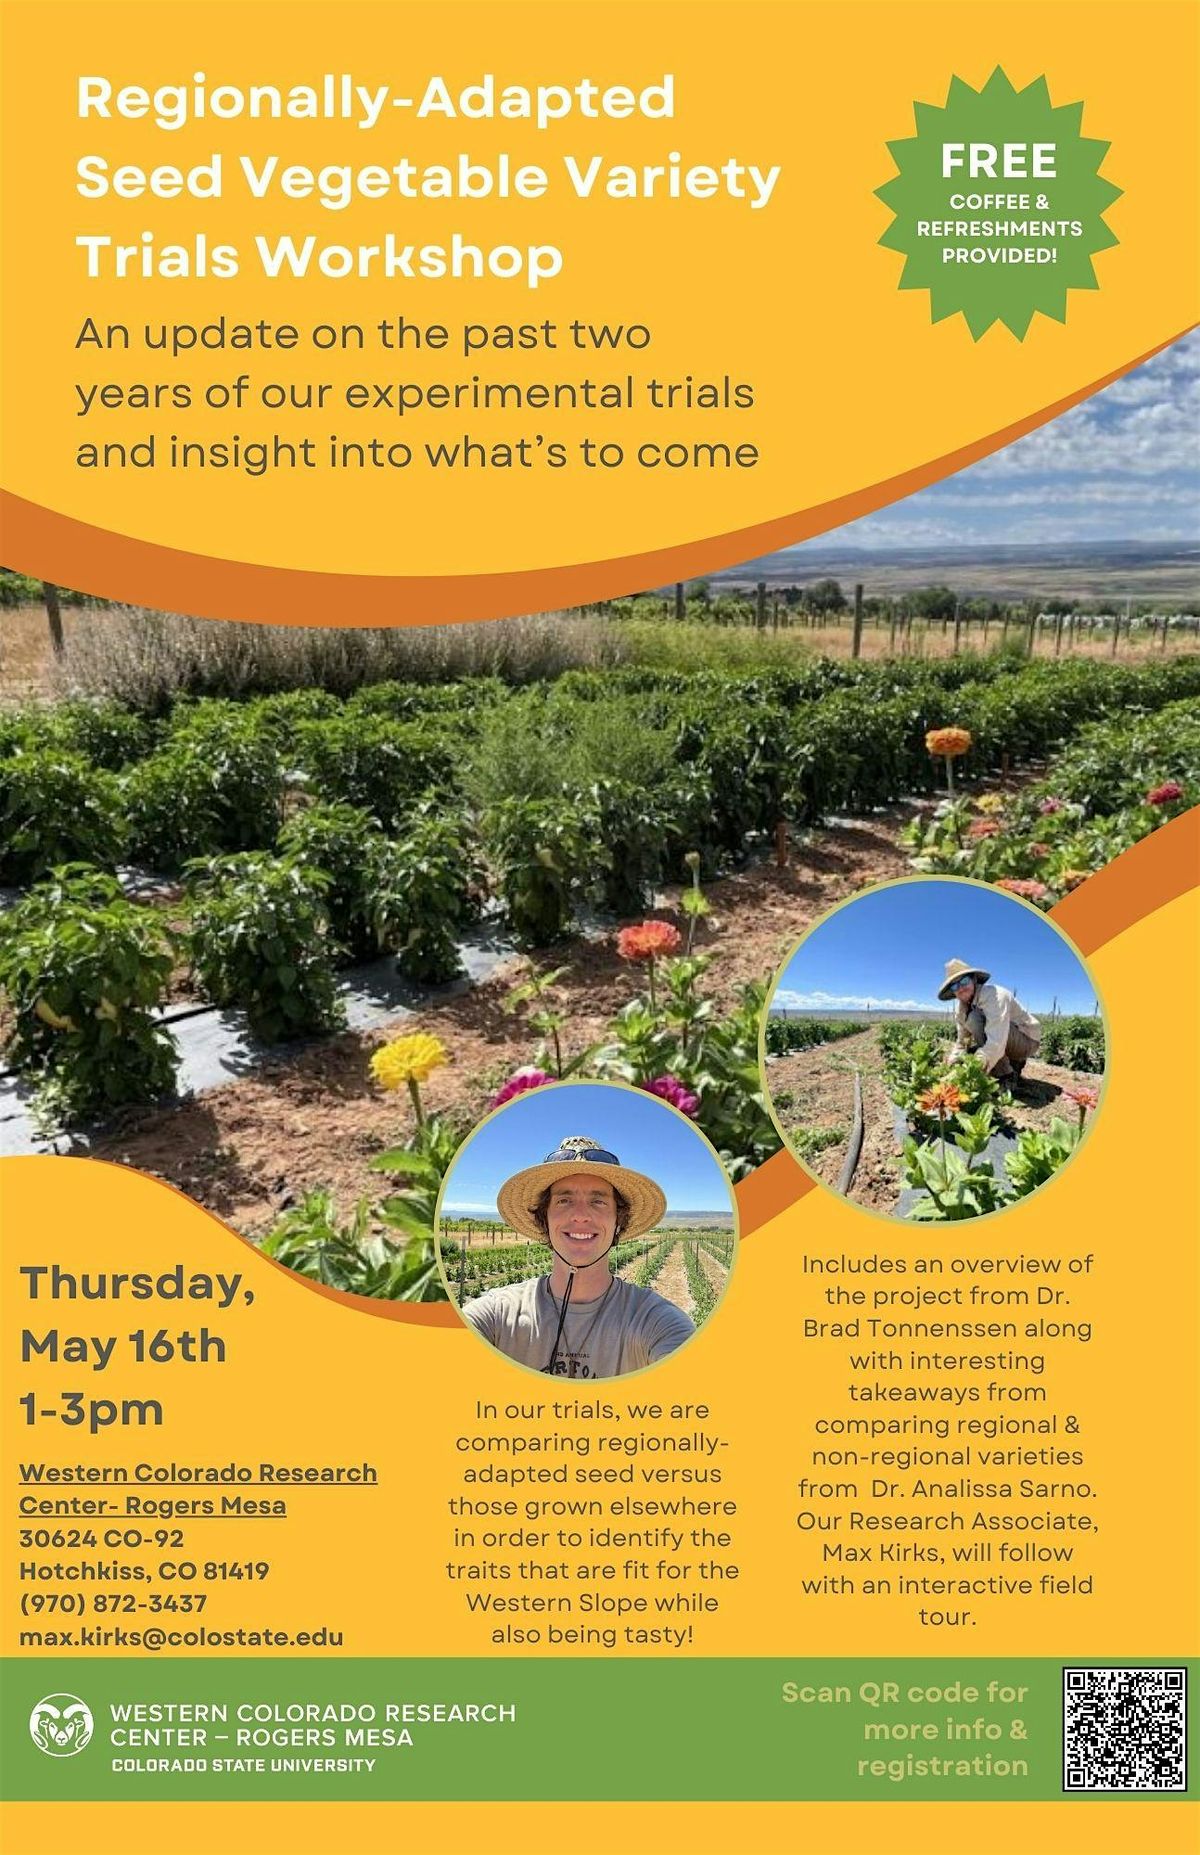 Two Years of Regionally-Adapted Seed Variety Trials Workshop